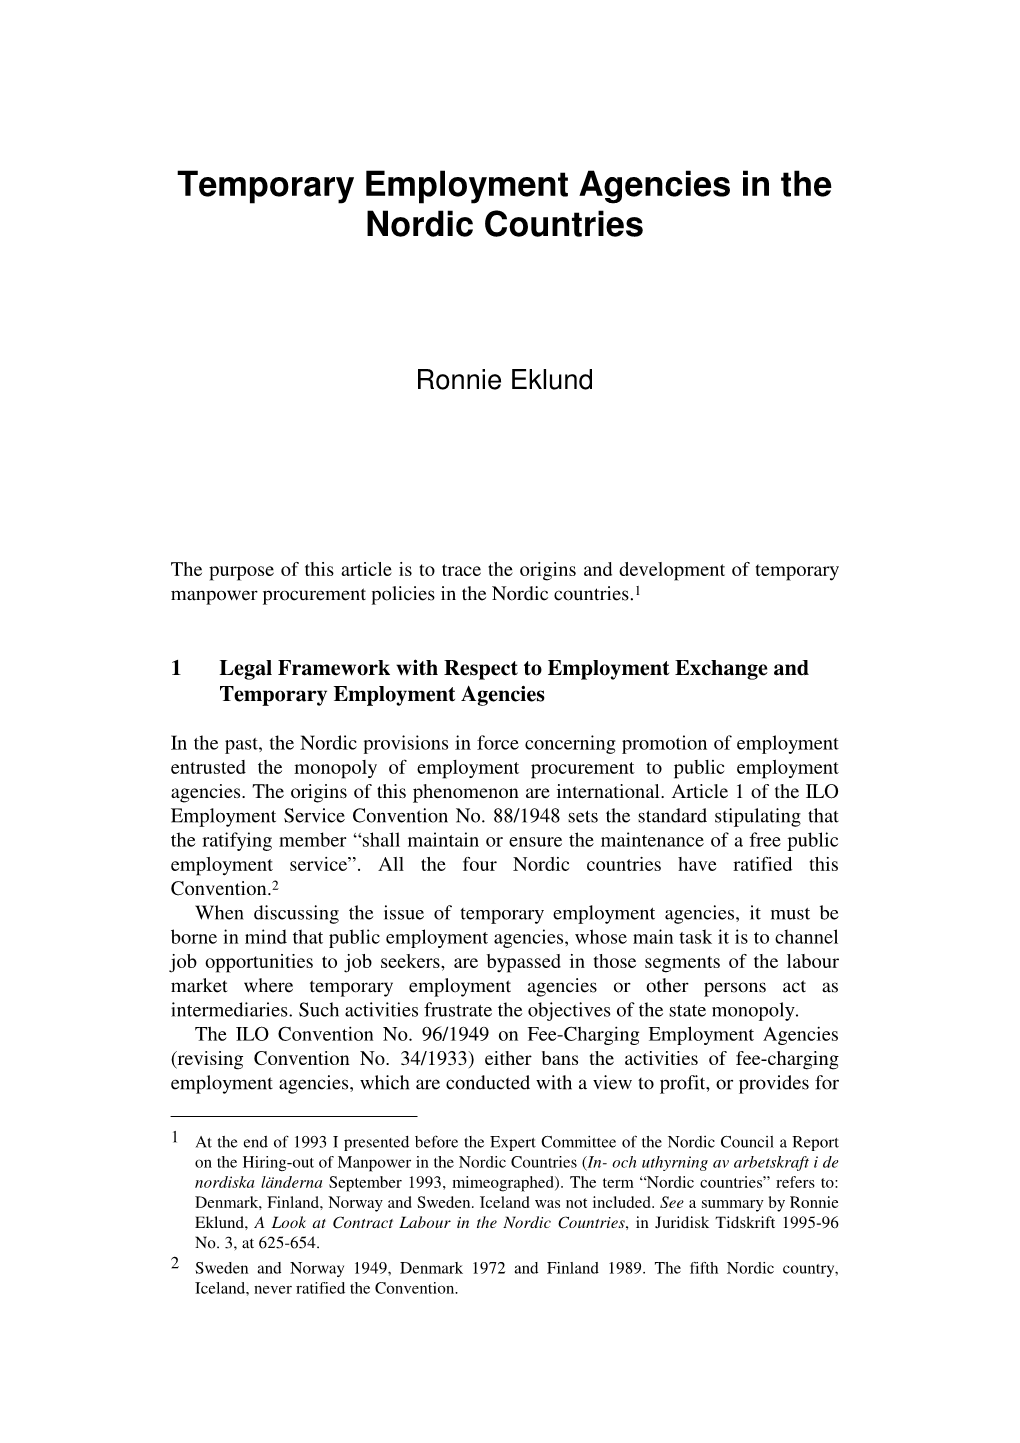 Temporary Employment Agencies in the Nordic Countries